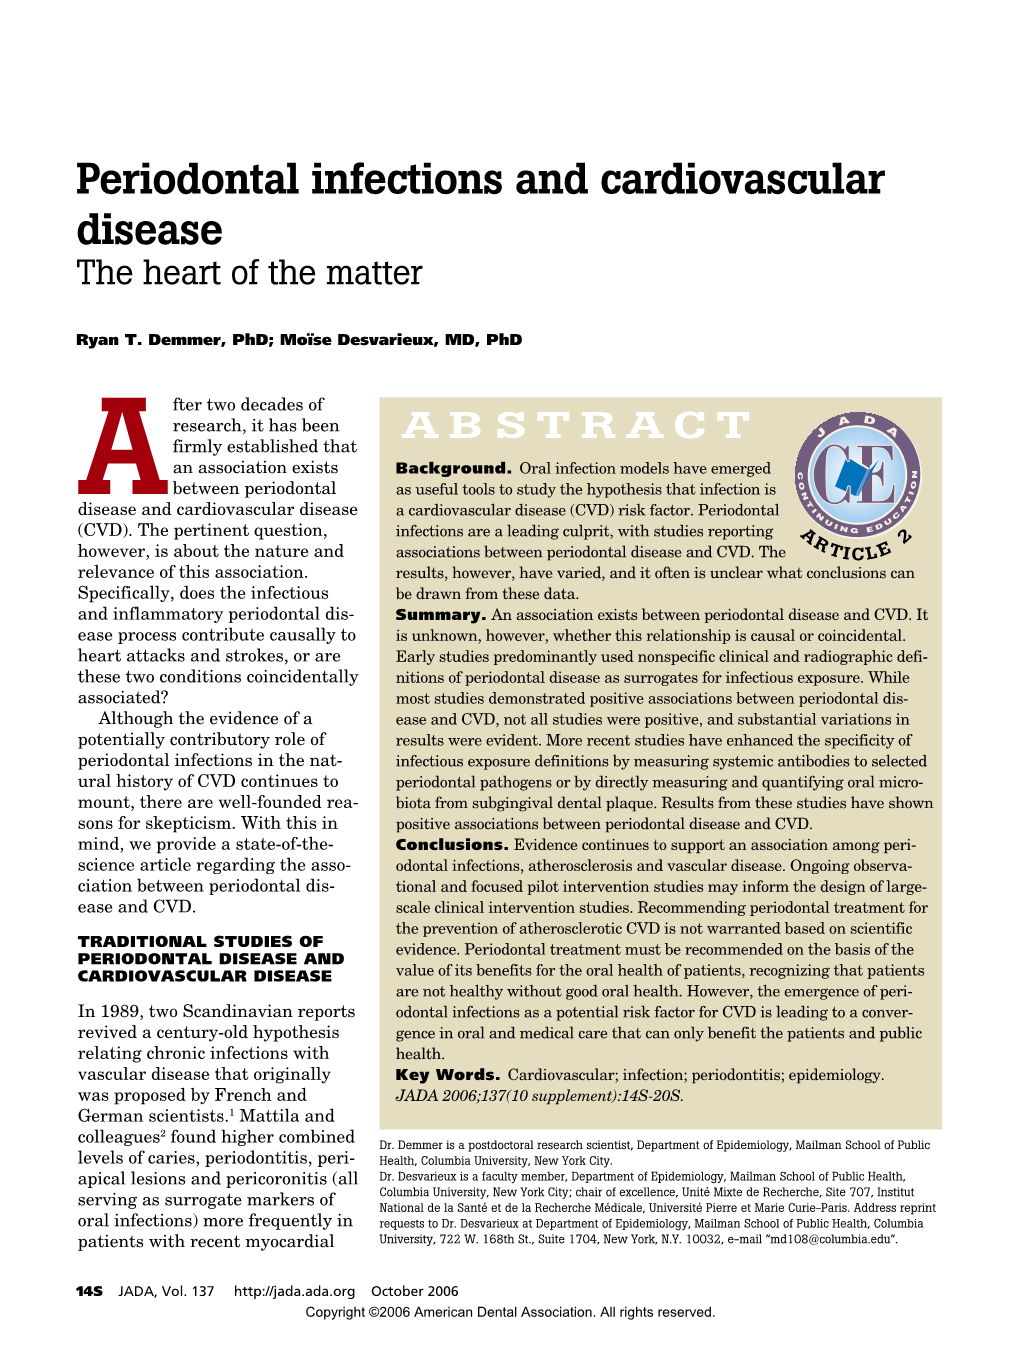 Periodontal Infections and Cardiovascular Disease the Heart of the Matter